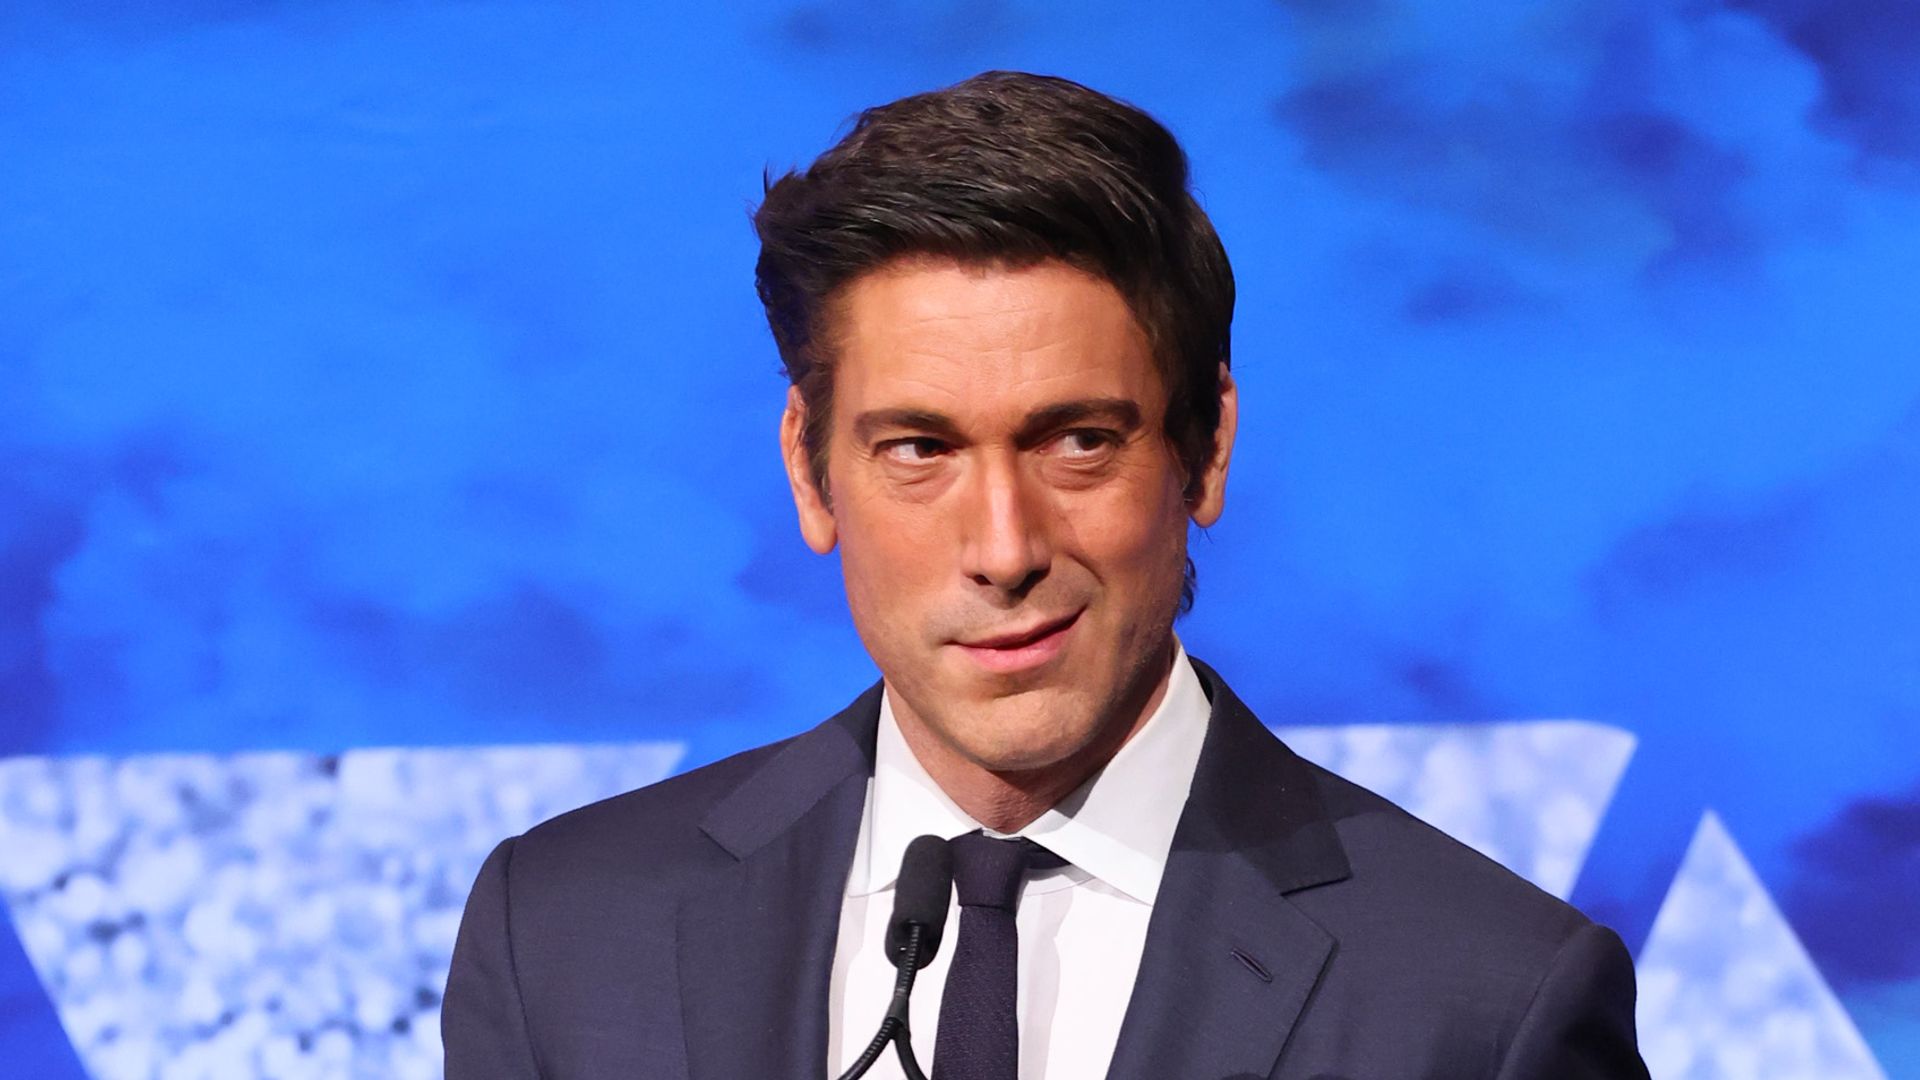 David Muir's rugged look in new vacation photos with rarely-seen family cause a stir